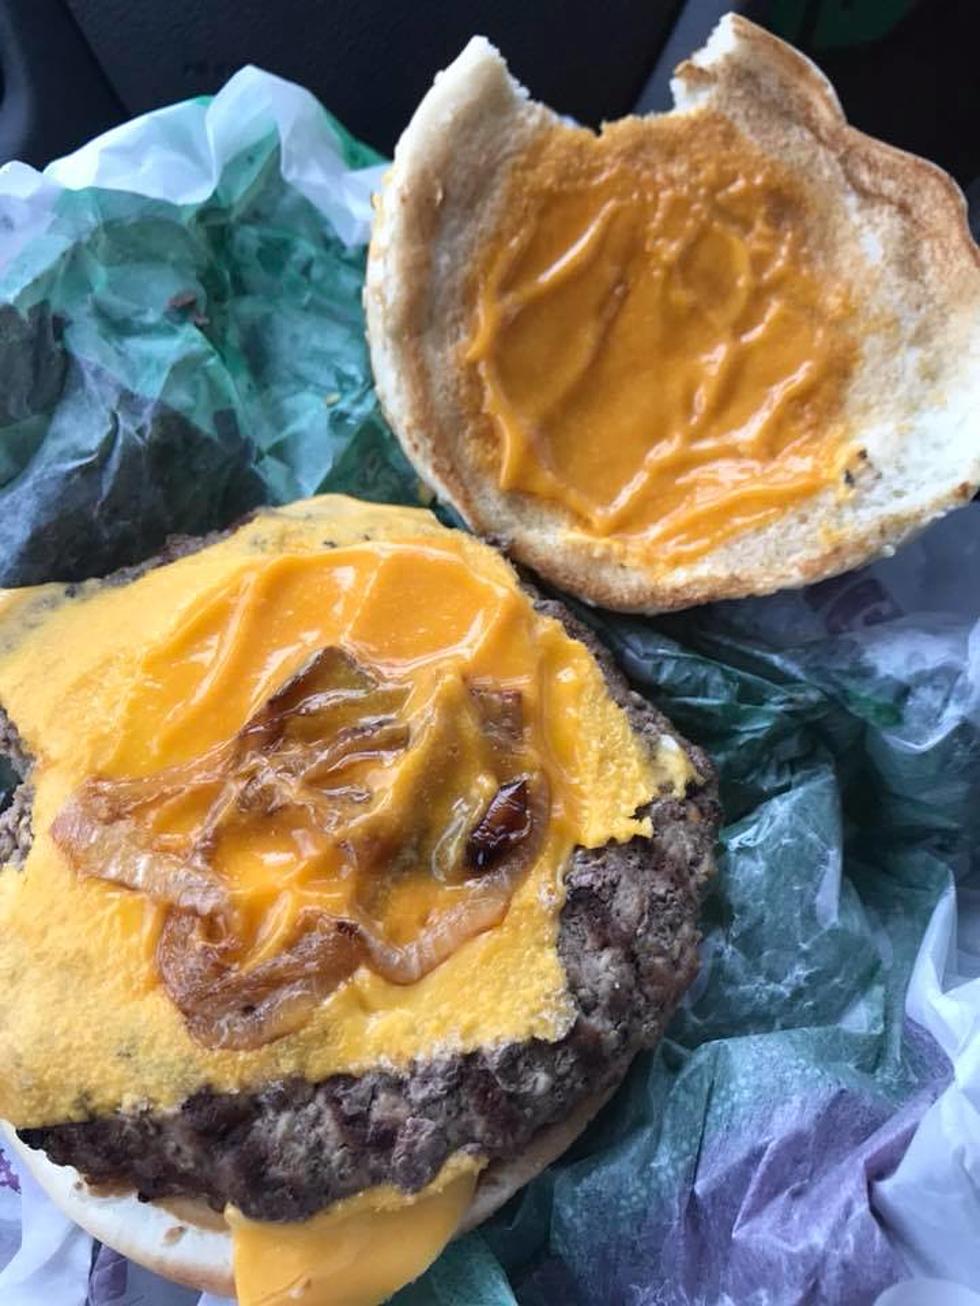 Hudson Valley Man Finds Cockroach in Fast-Food Burger